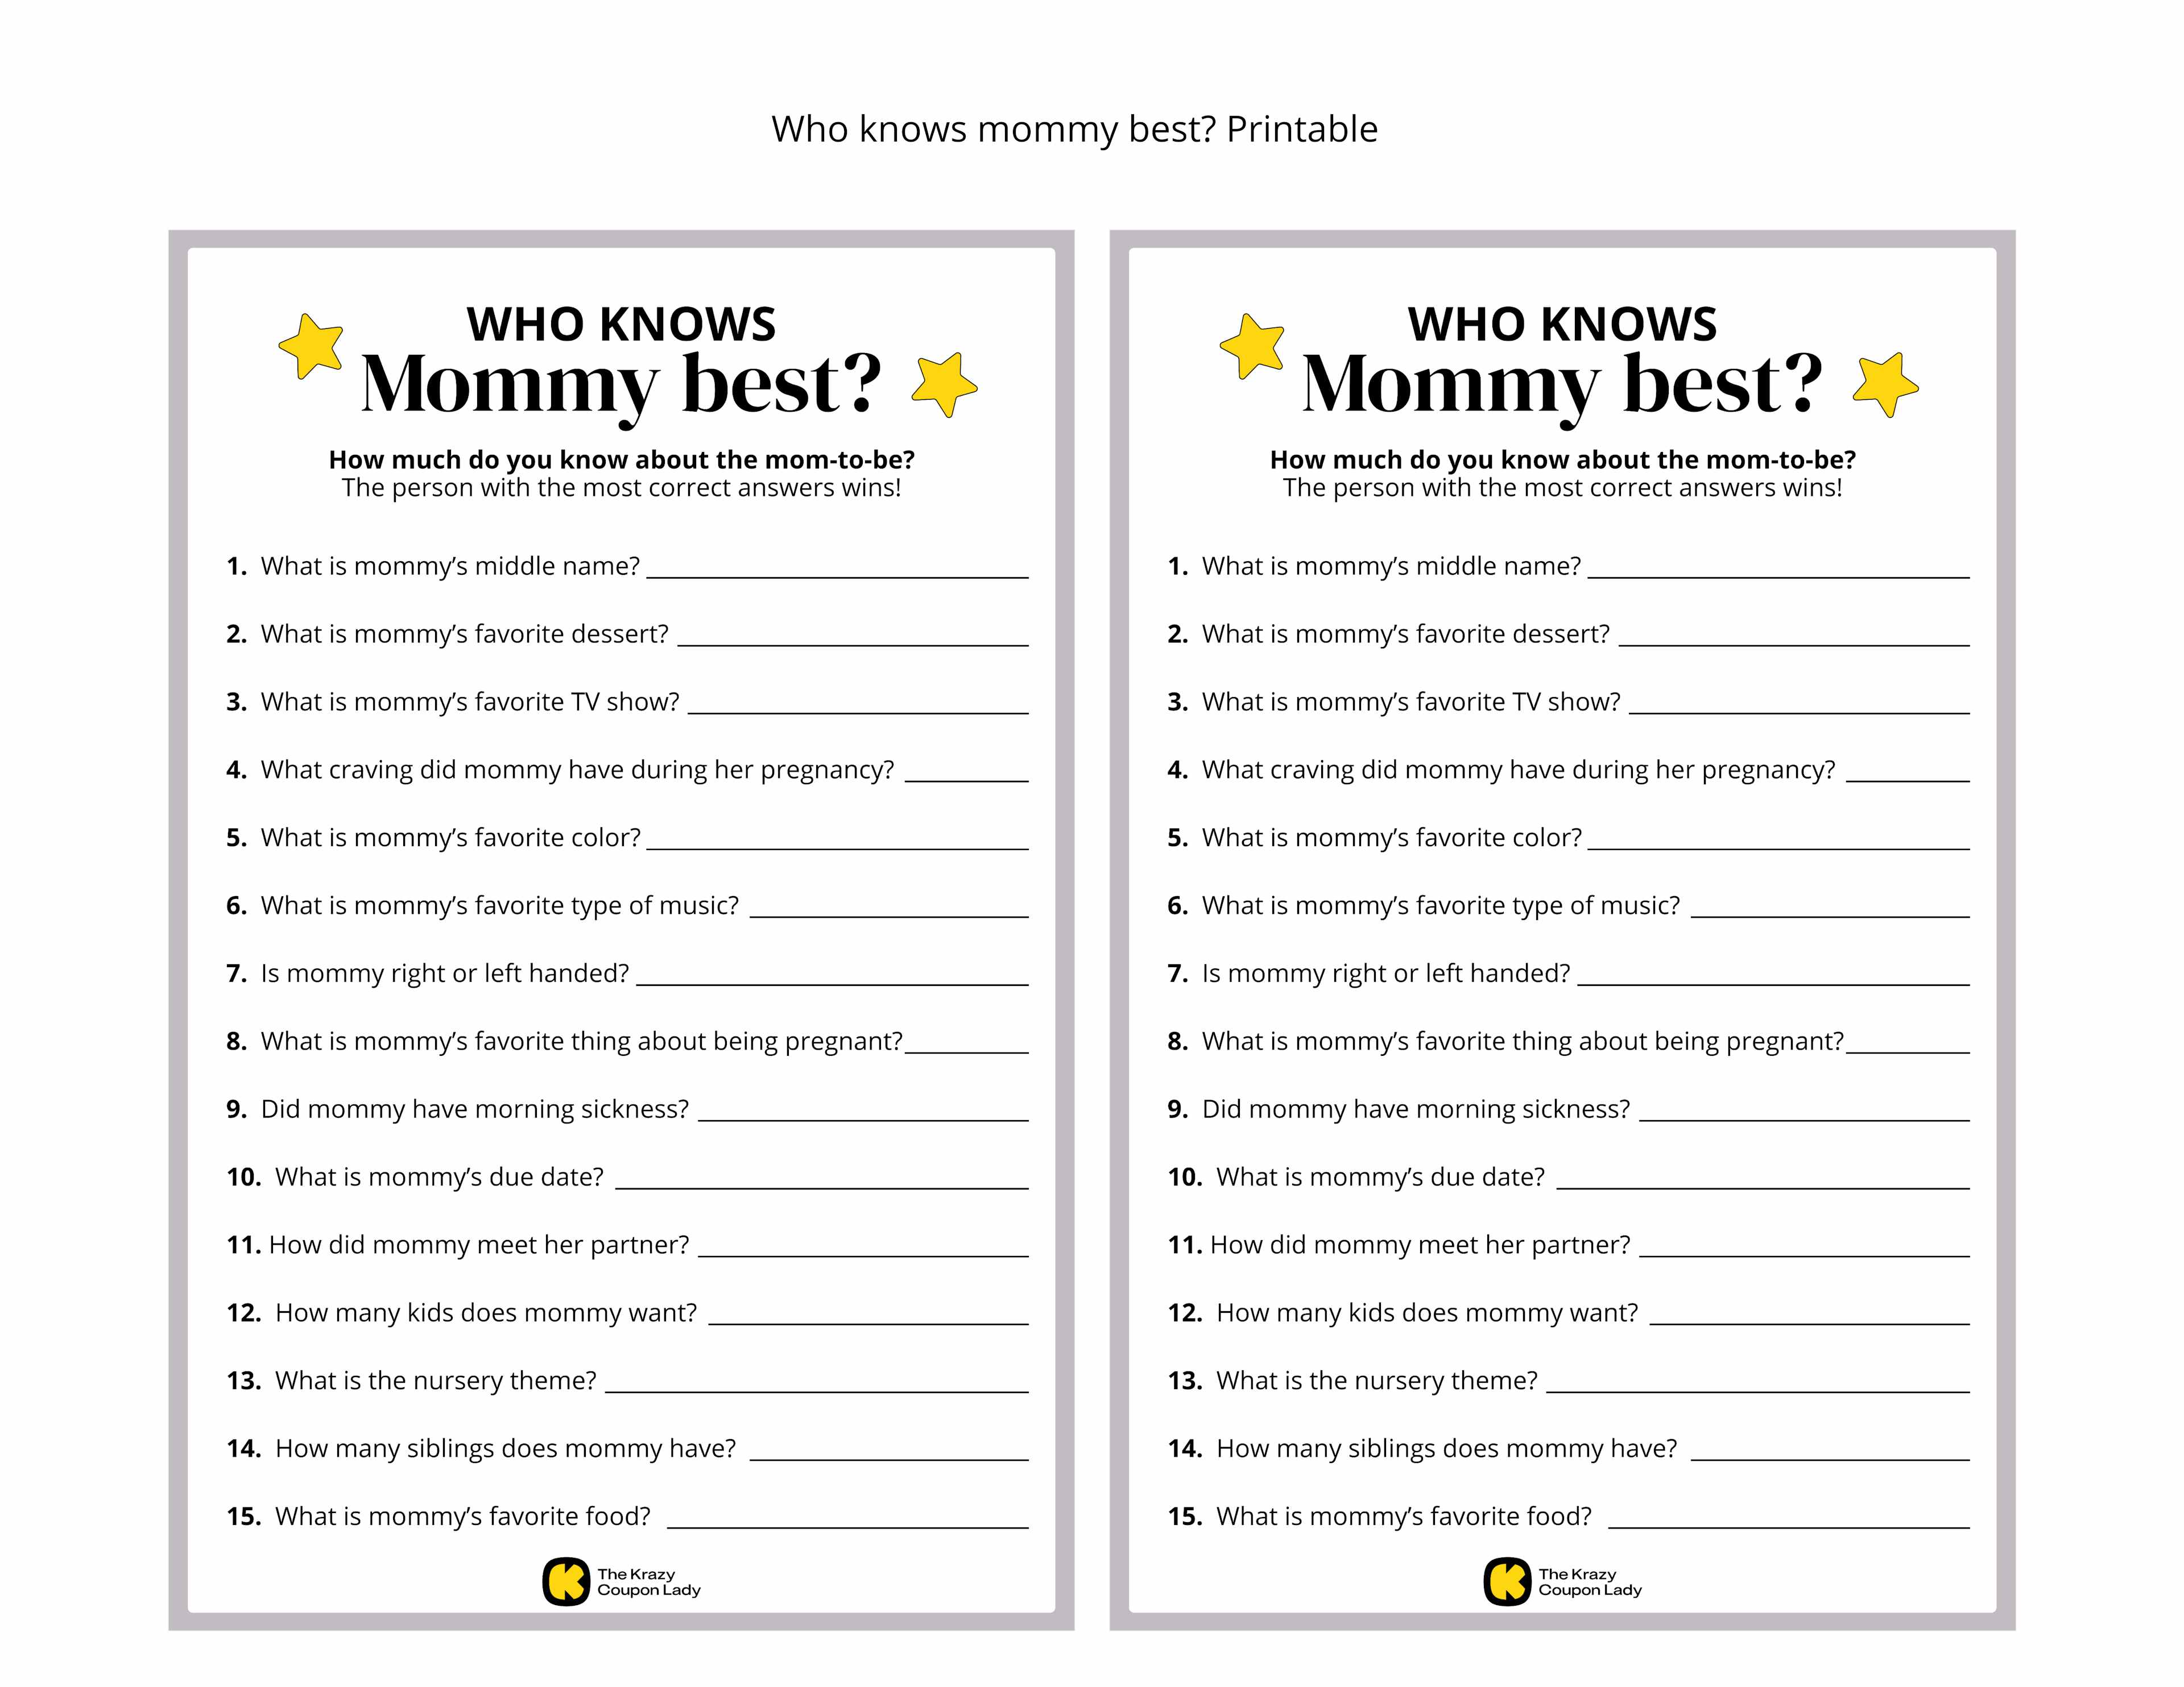 Who knows mommy best trivia game for baby shower